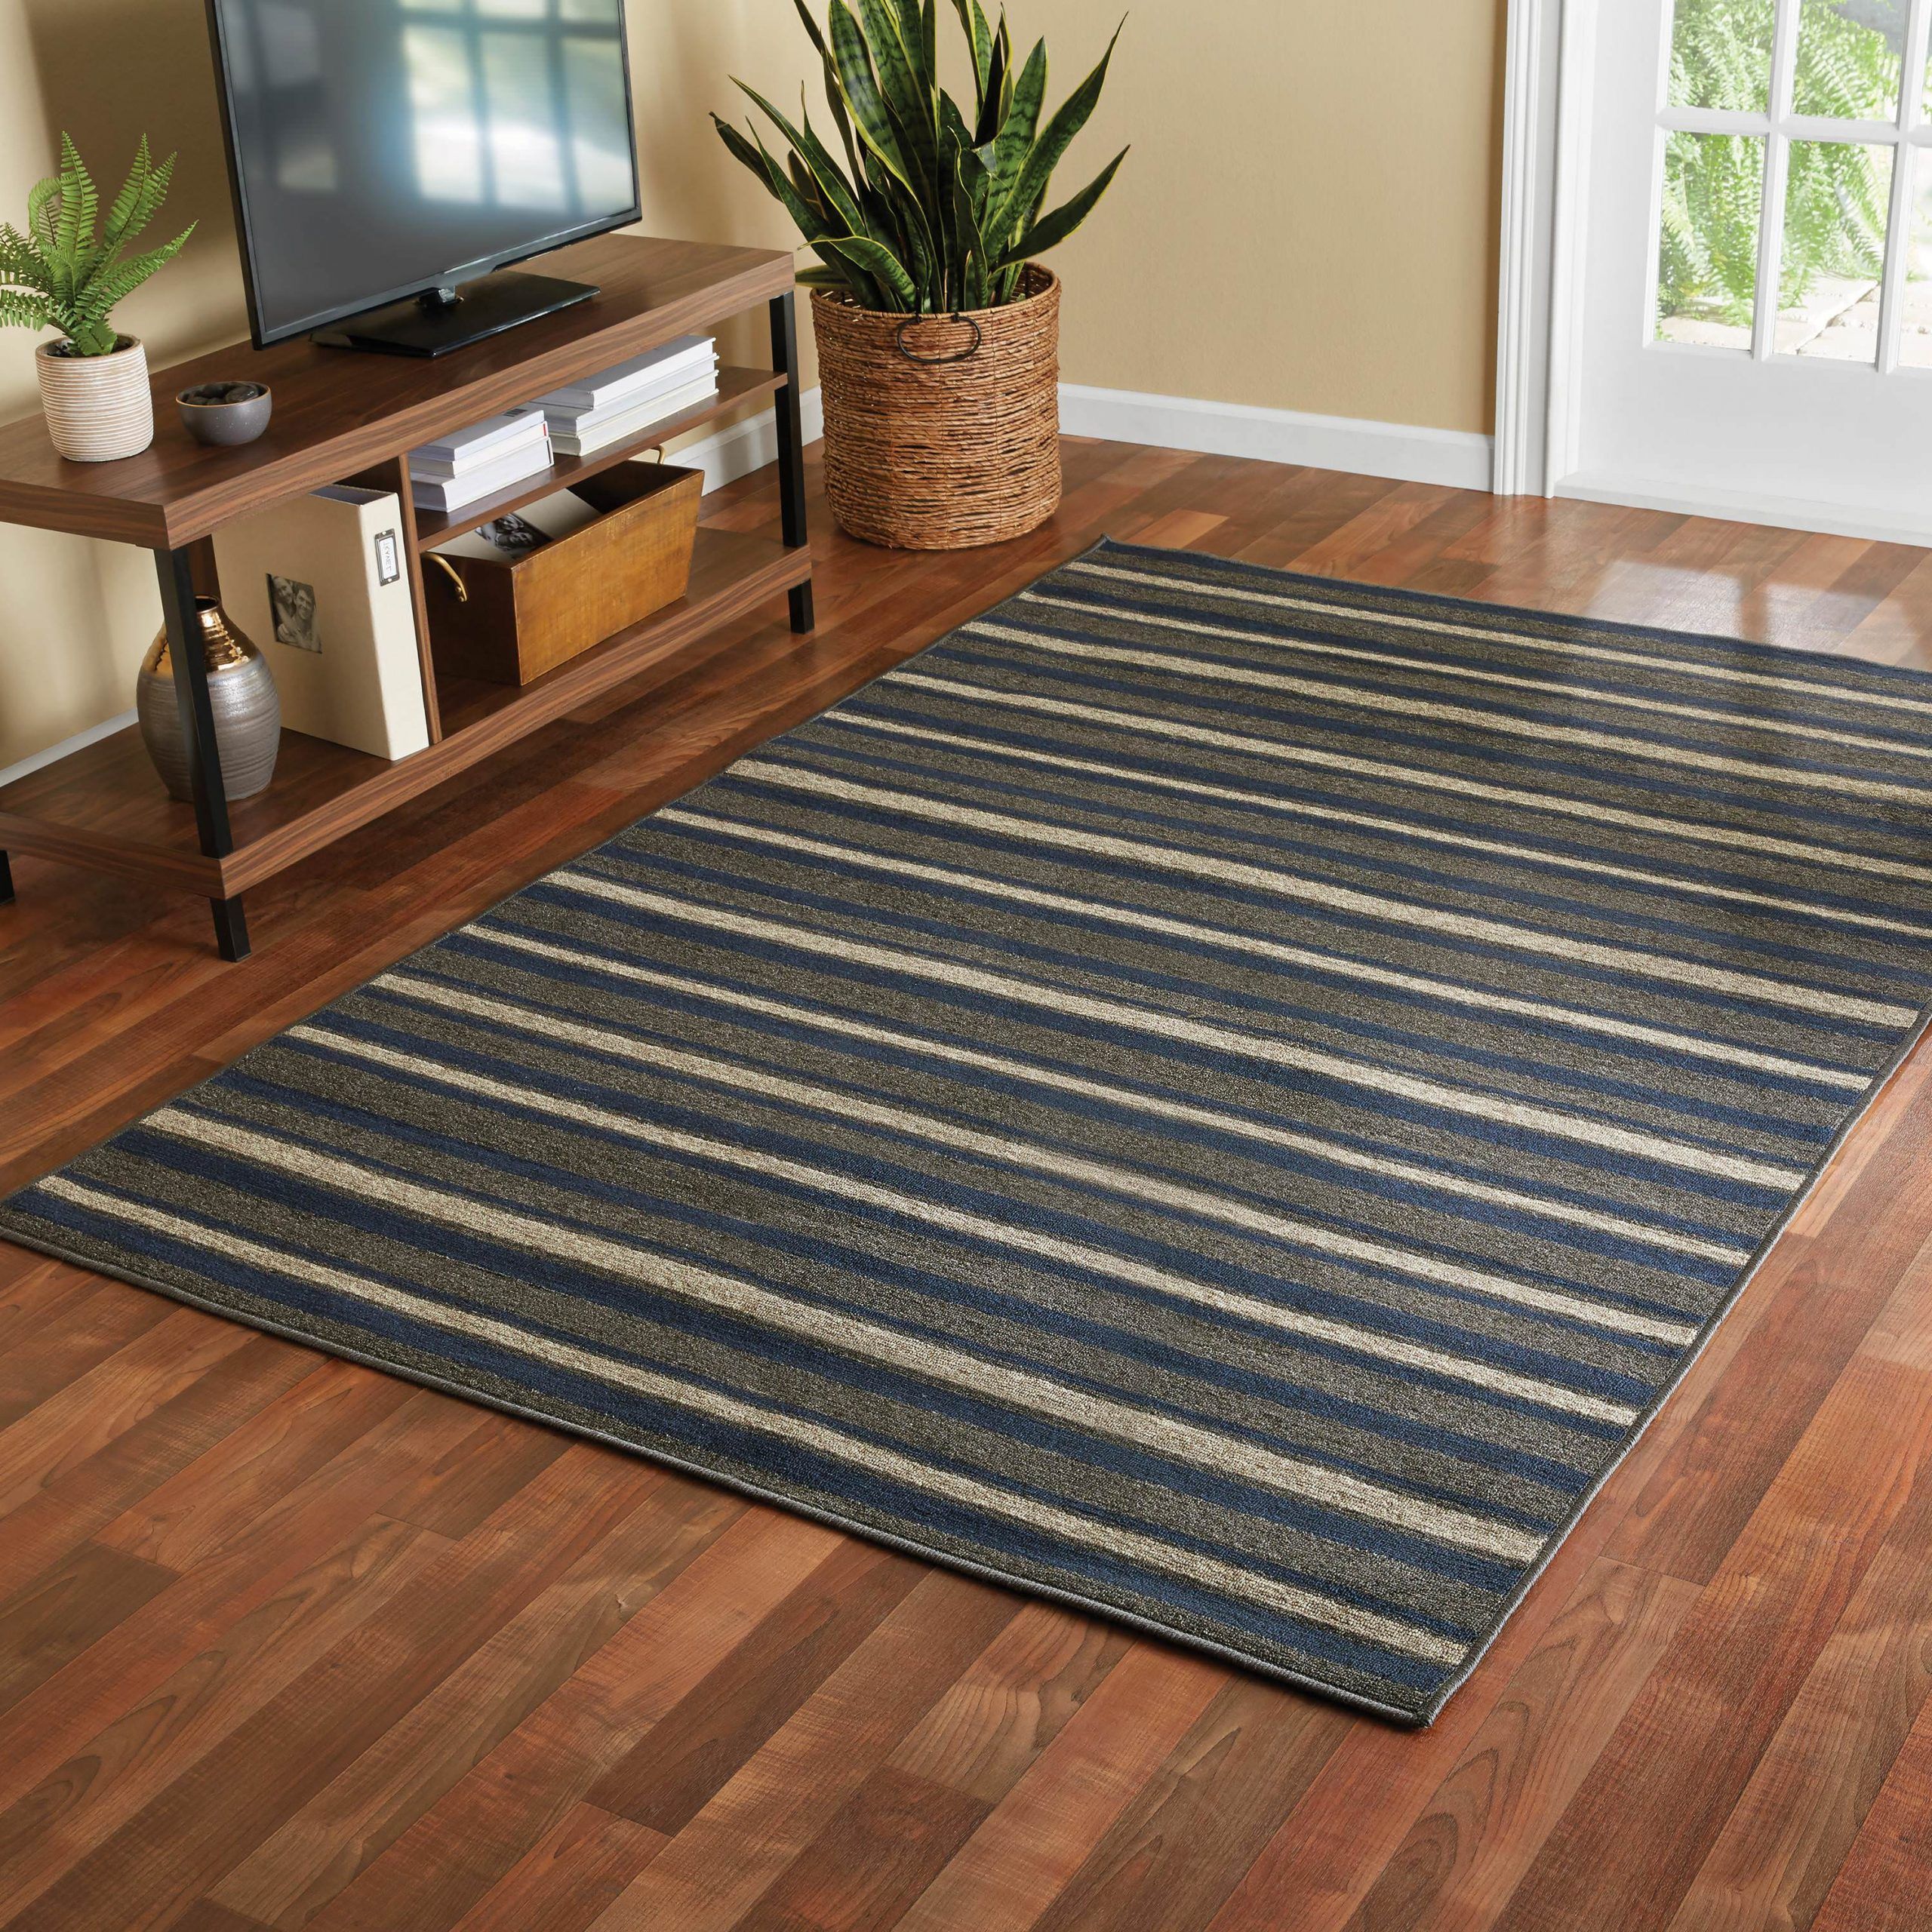 Mainstays Sonata Striped Indoor Living Room Area Rug, Navy Blue And For Famous Navy Blue And White Striped Ottomans (View 6 of 10)